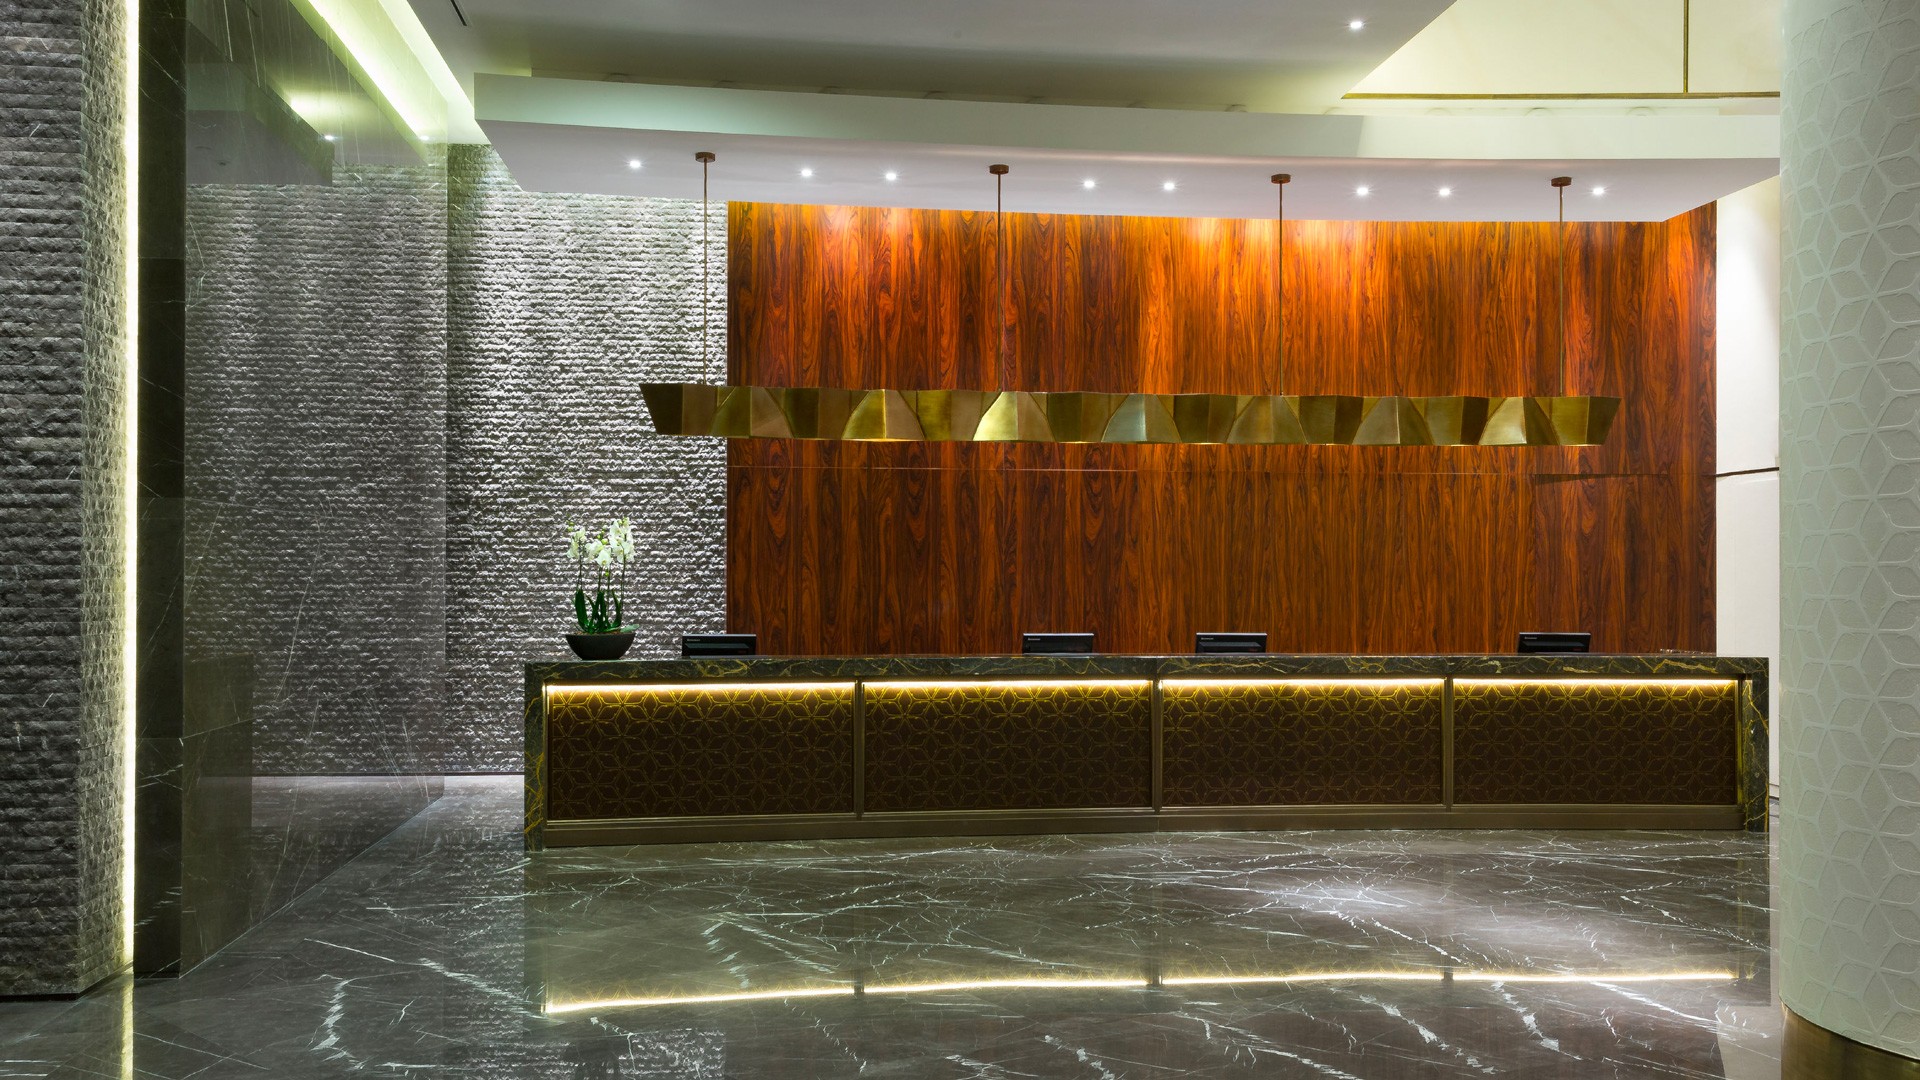 Poliform_contract_hospitality_HILTON_HOTEL_01_1920x1080px_cover